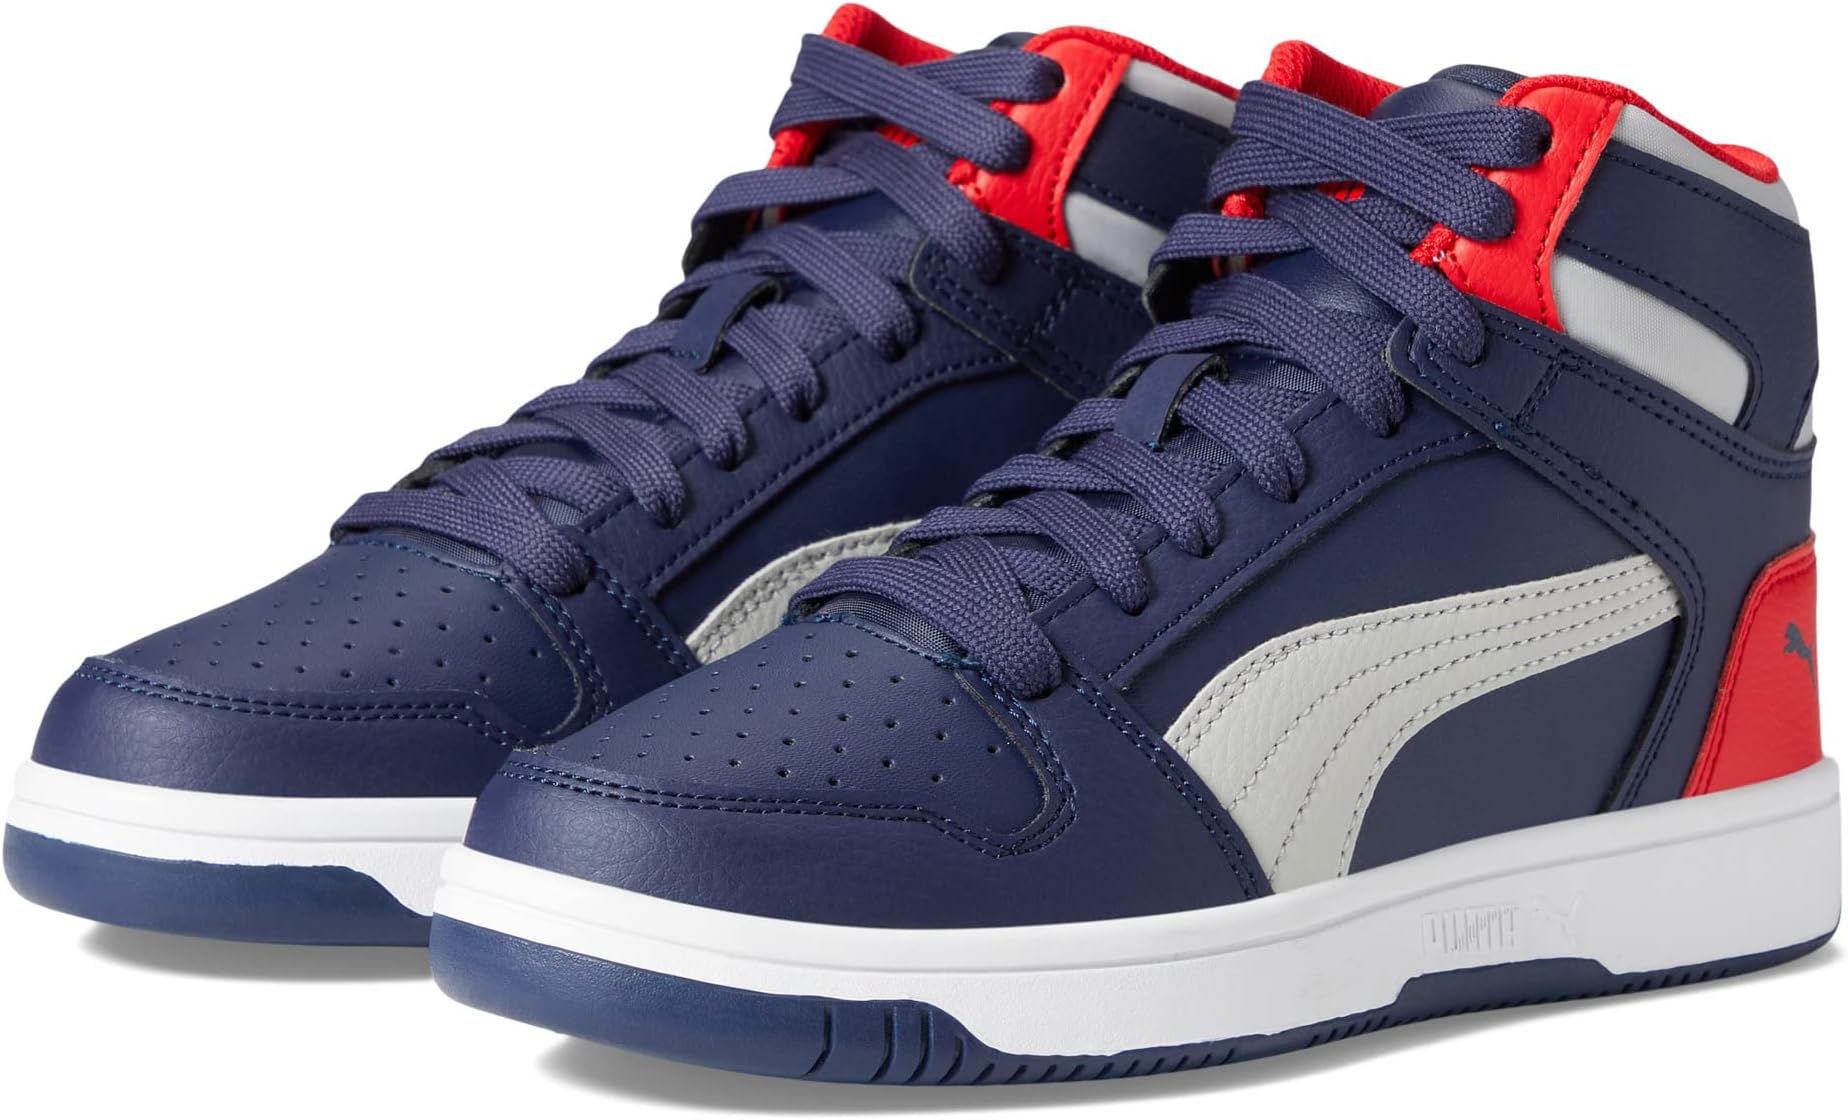 Кроссовки Rebound Layup Synthetic Leather PUMA, цвет Peacoat/Gray Violet/High-Risk Red/Puma White кроссовки puma zapatillas white peacoat gold